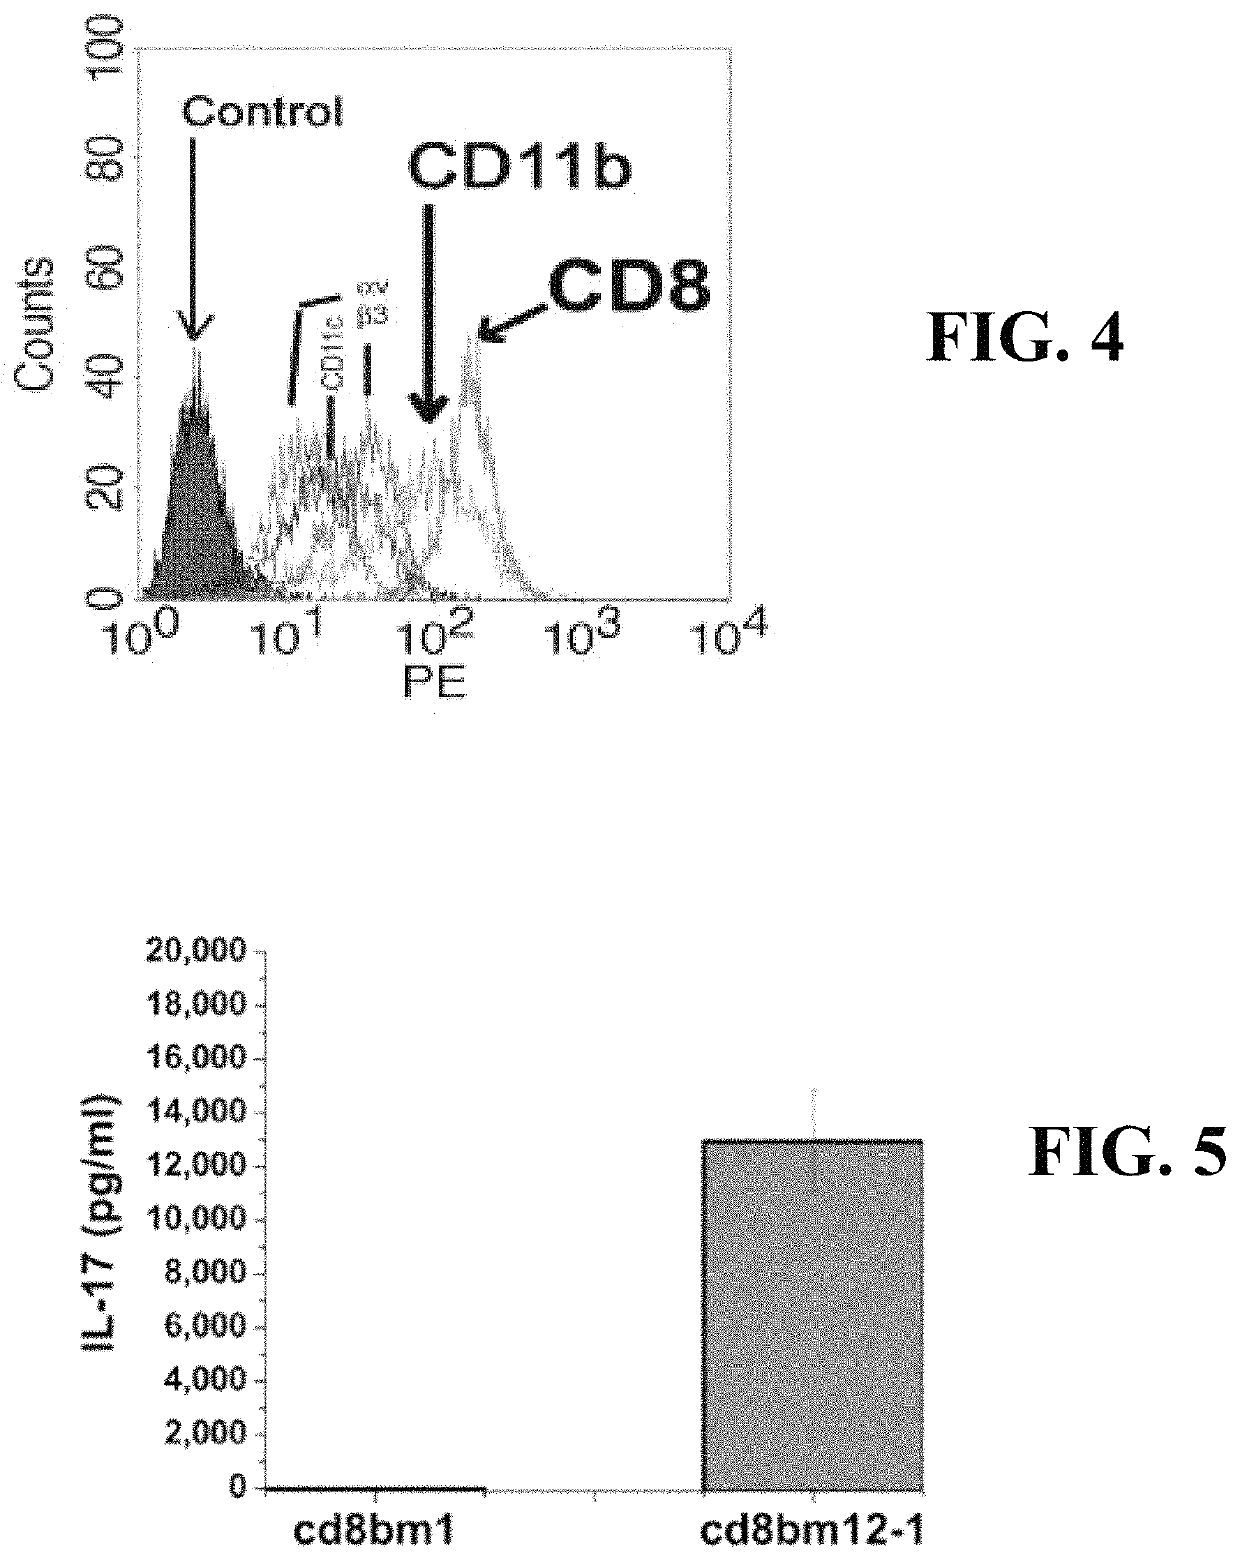 Diagnostic and immunotherapy compositions and methods for disease states mediated by inhibitor-resistant CD8 T-cells